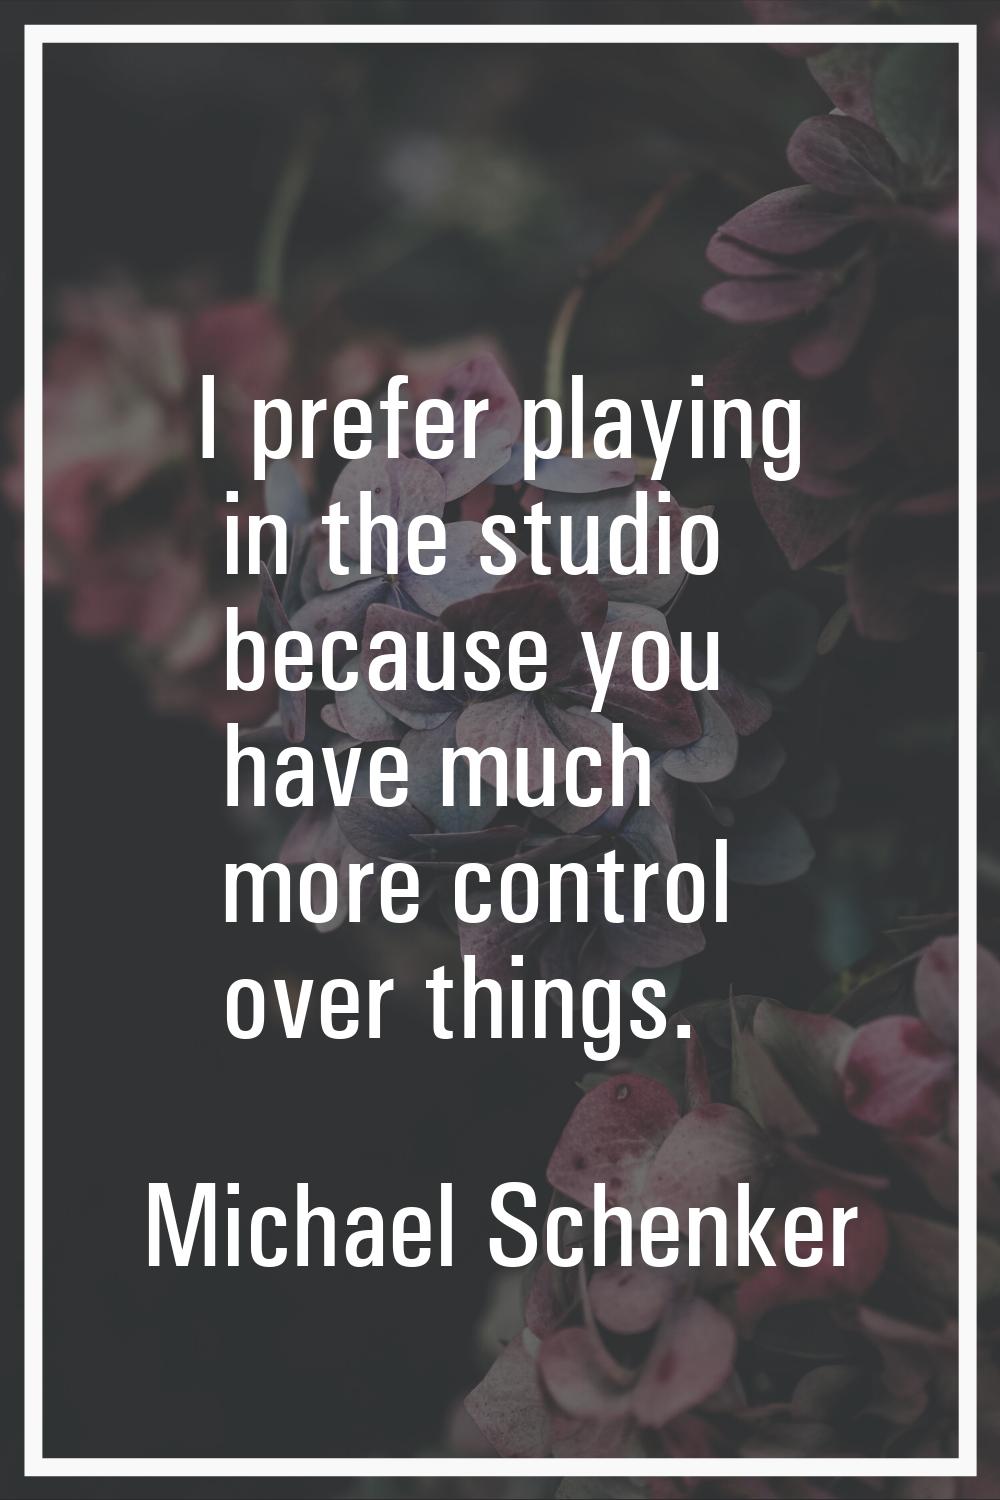 I prefer playing in the studio because you have much more control over things.